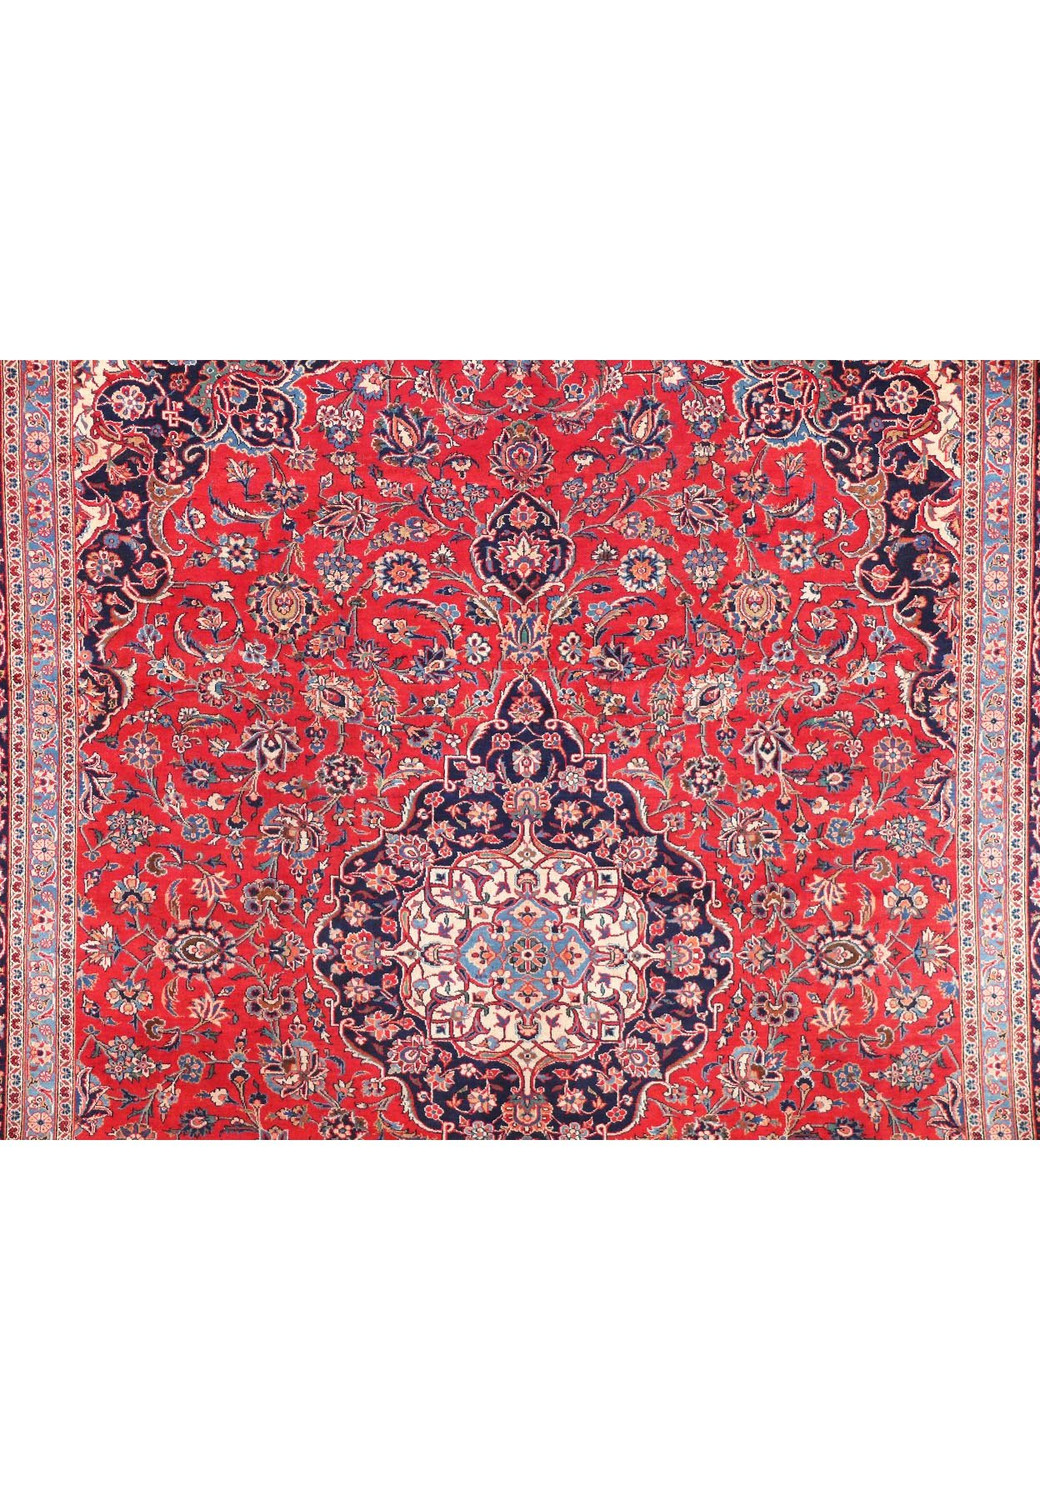 10 x 14 Classic Persian Kashan Rug | Known from TV Show Shark Tank